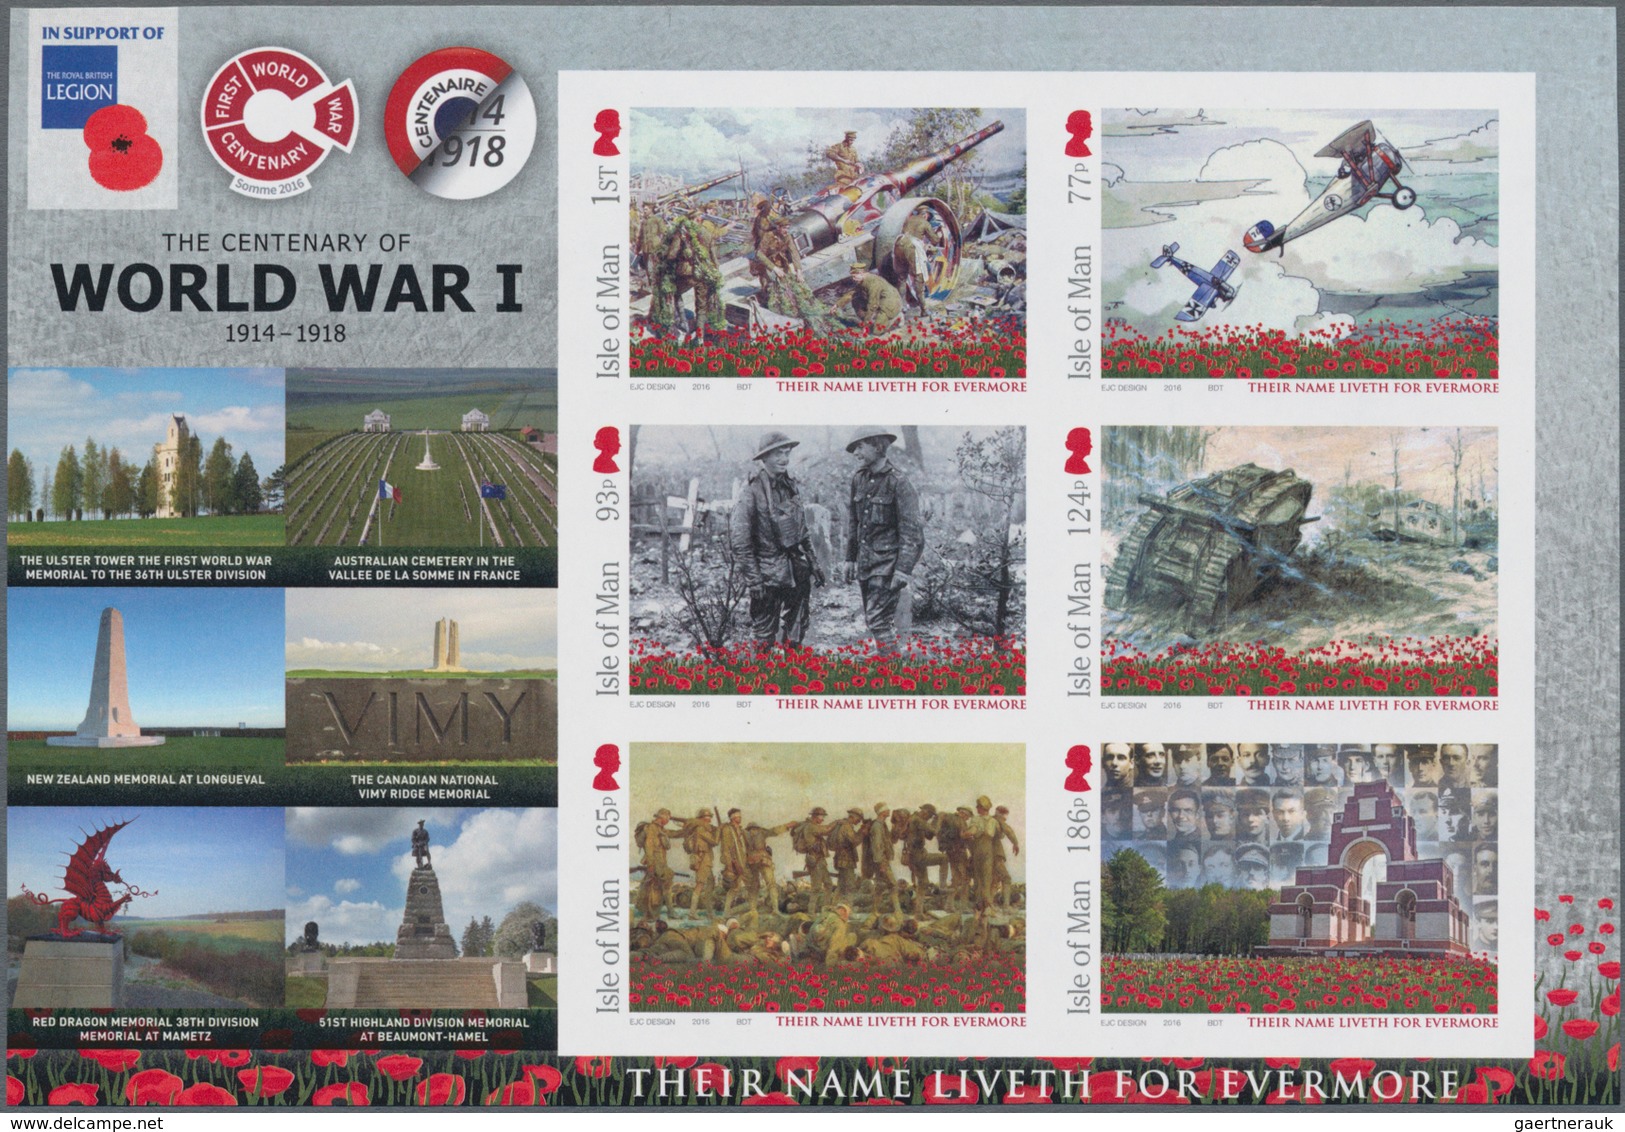 Großbritannien - Isle Of Man: 2016. IMPERFORATE Souvenir Sheet Of 6 For The Issue "100th Anniversary - Man (Insel)